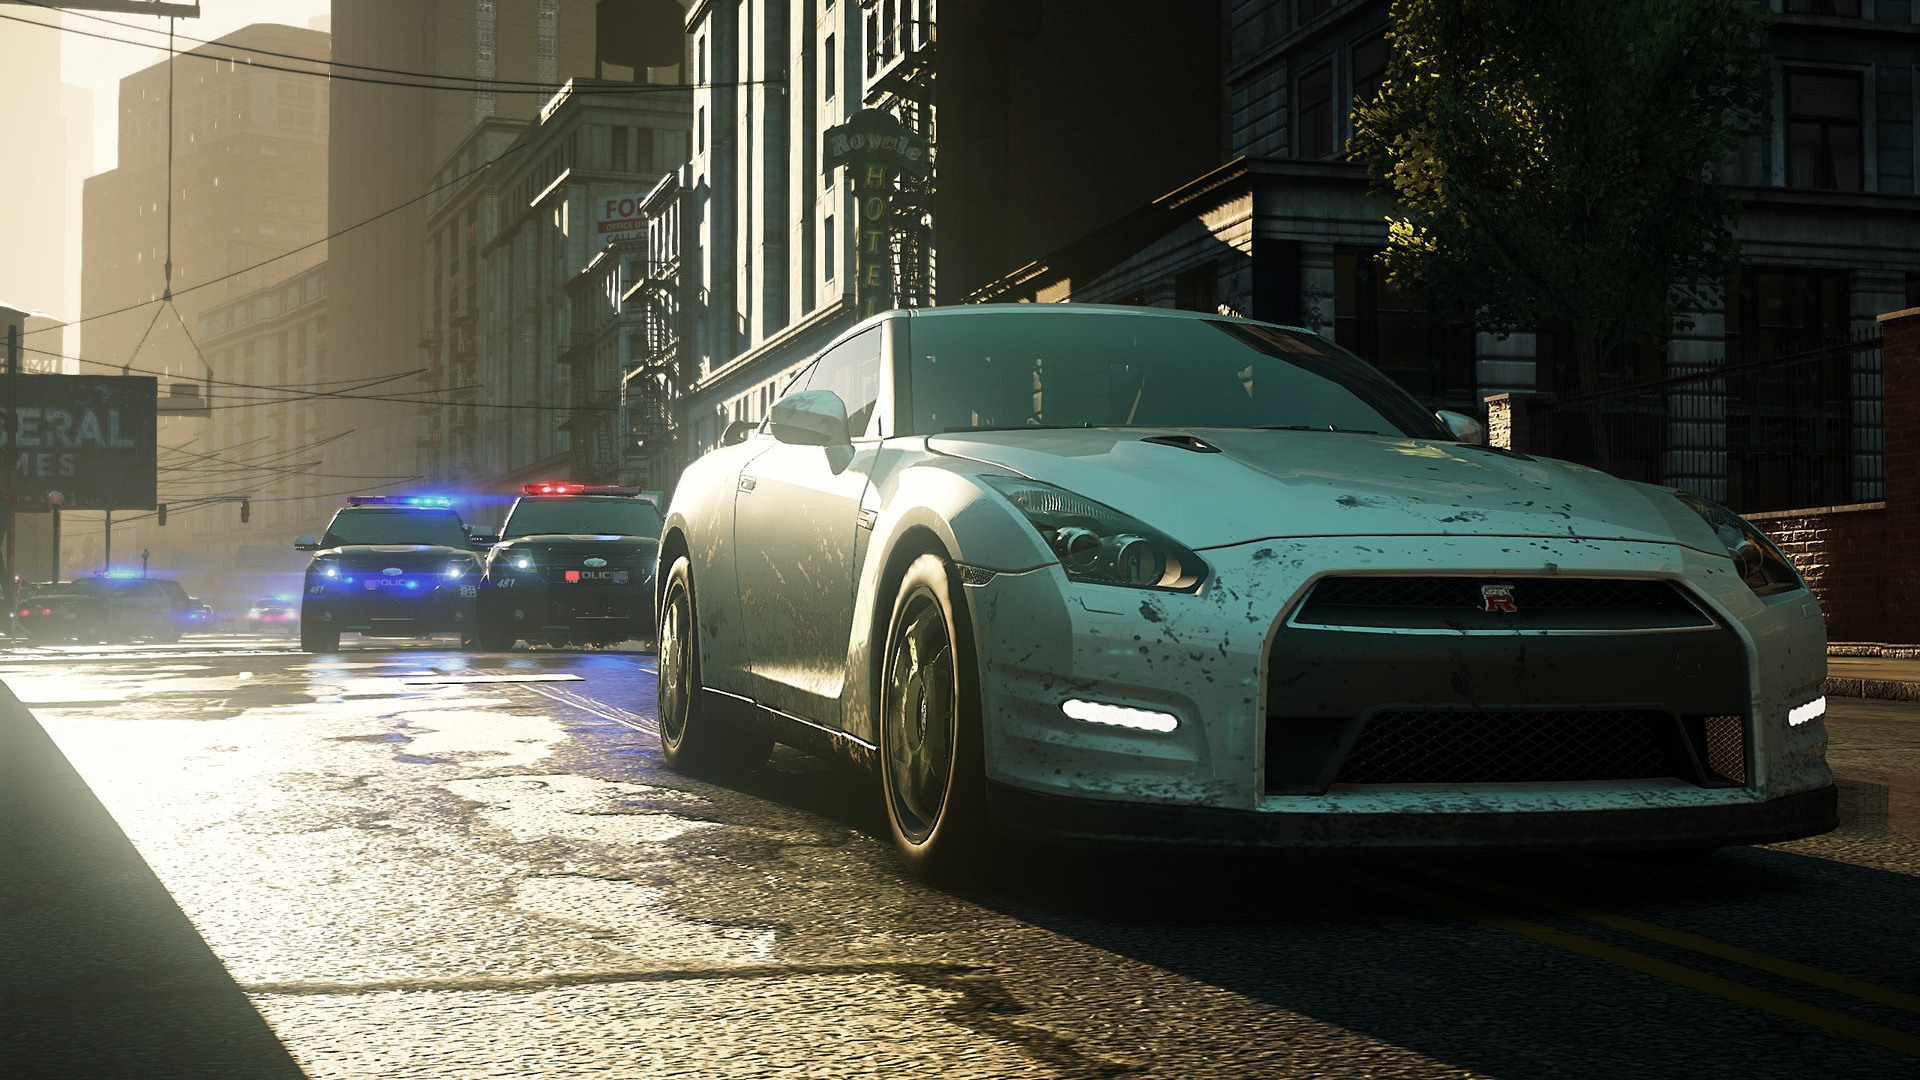 Need for Speed: Most Wanted 极品飞车17：最高通缉 高清壁纸20 - 1920x1080